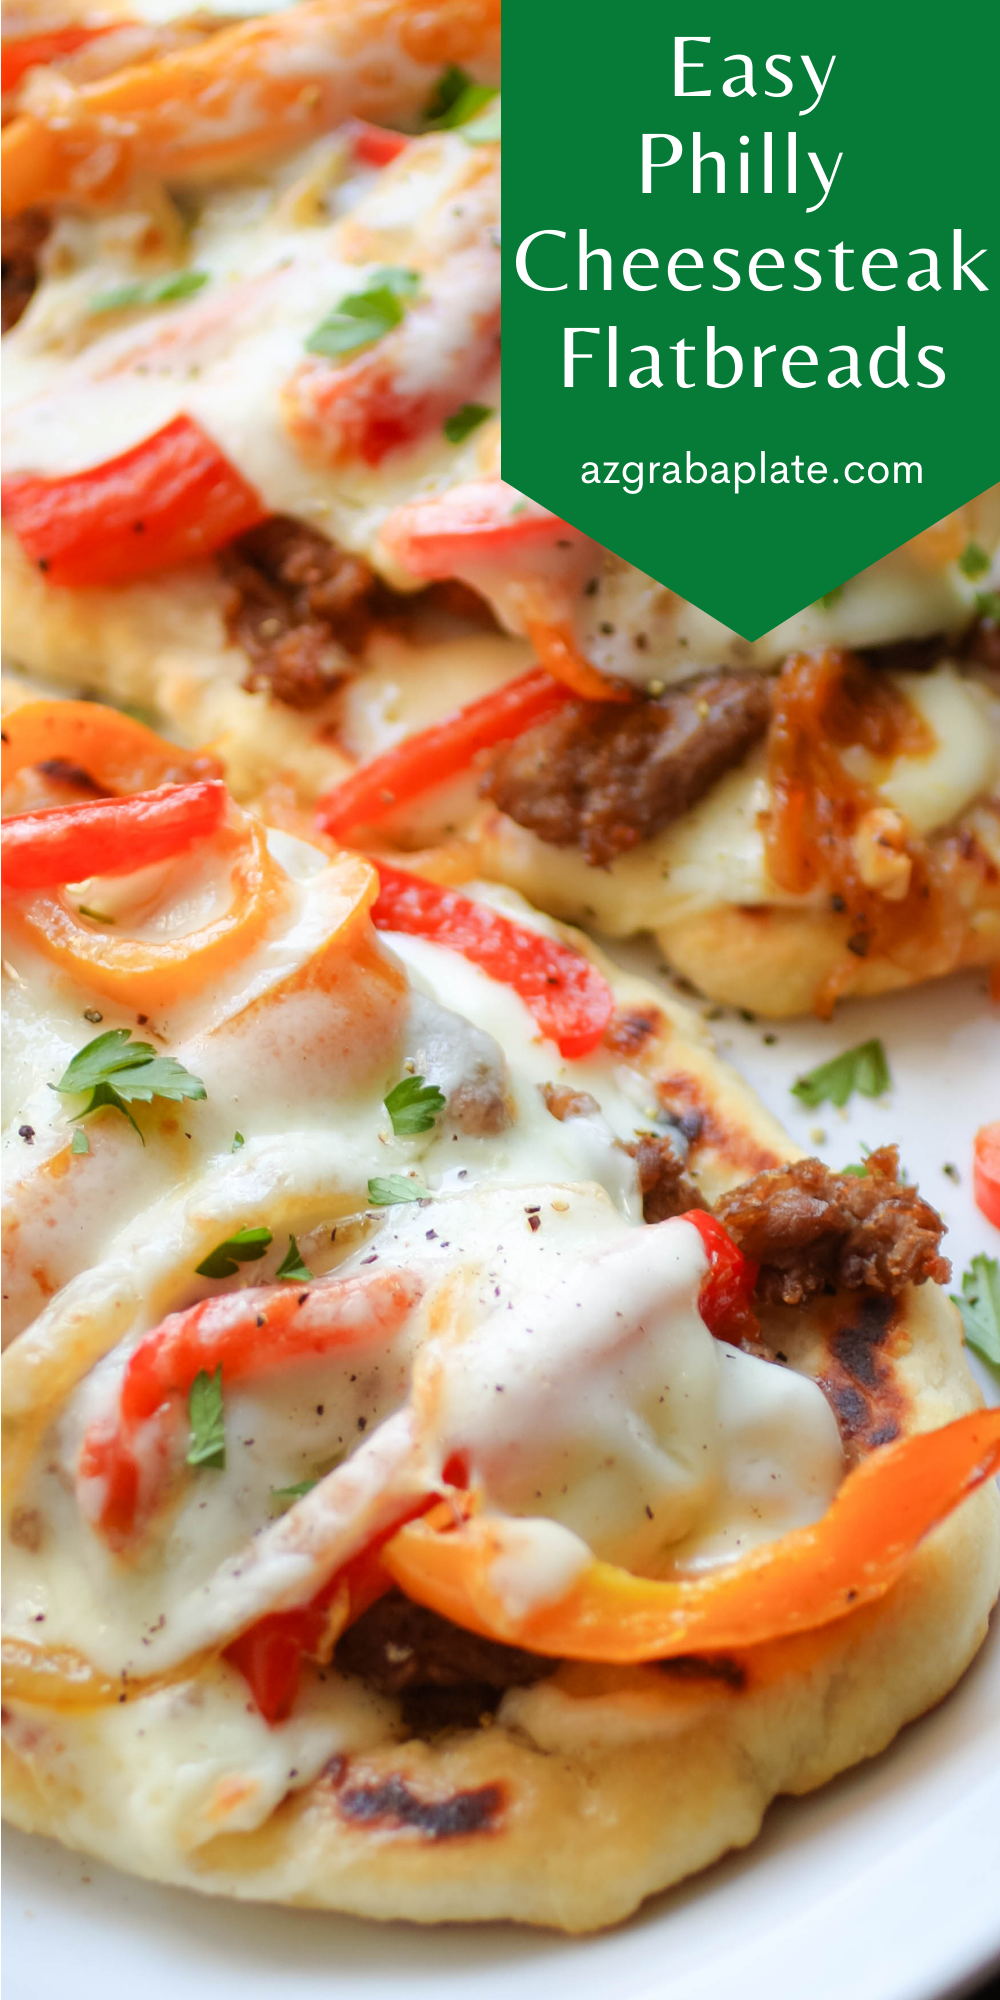 Easy Philly Cheesesteak Flatbreads are super-fun and tasty!